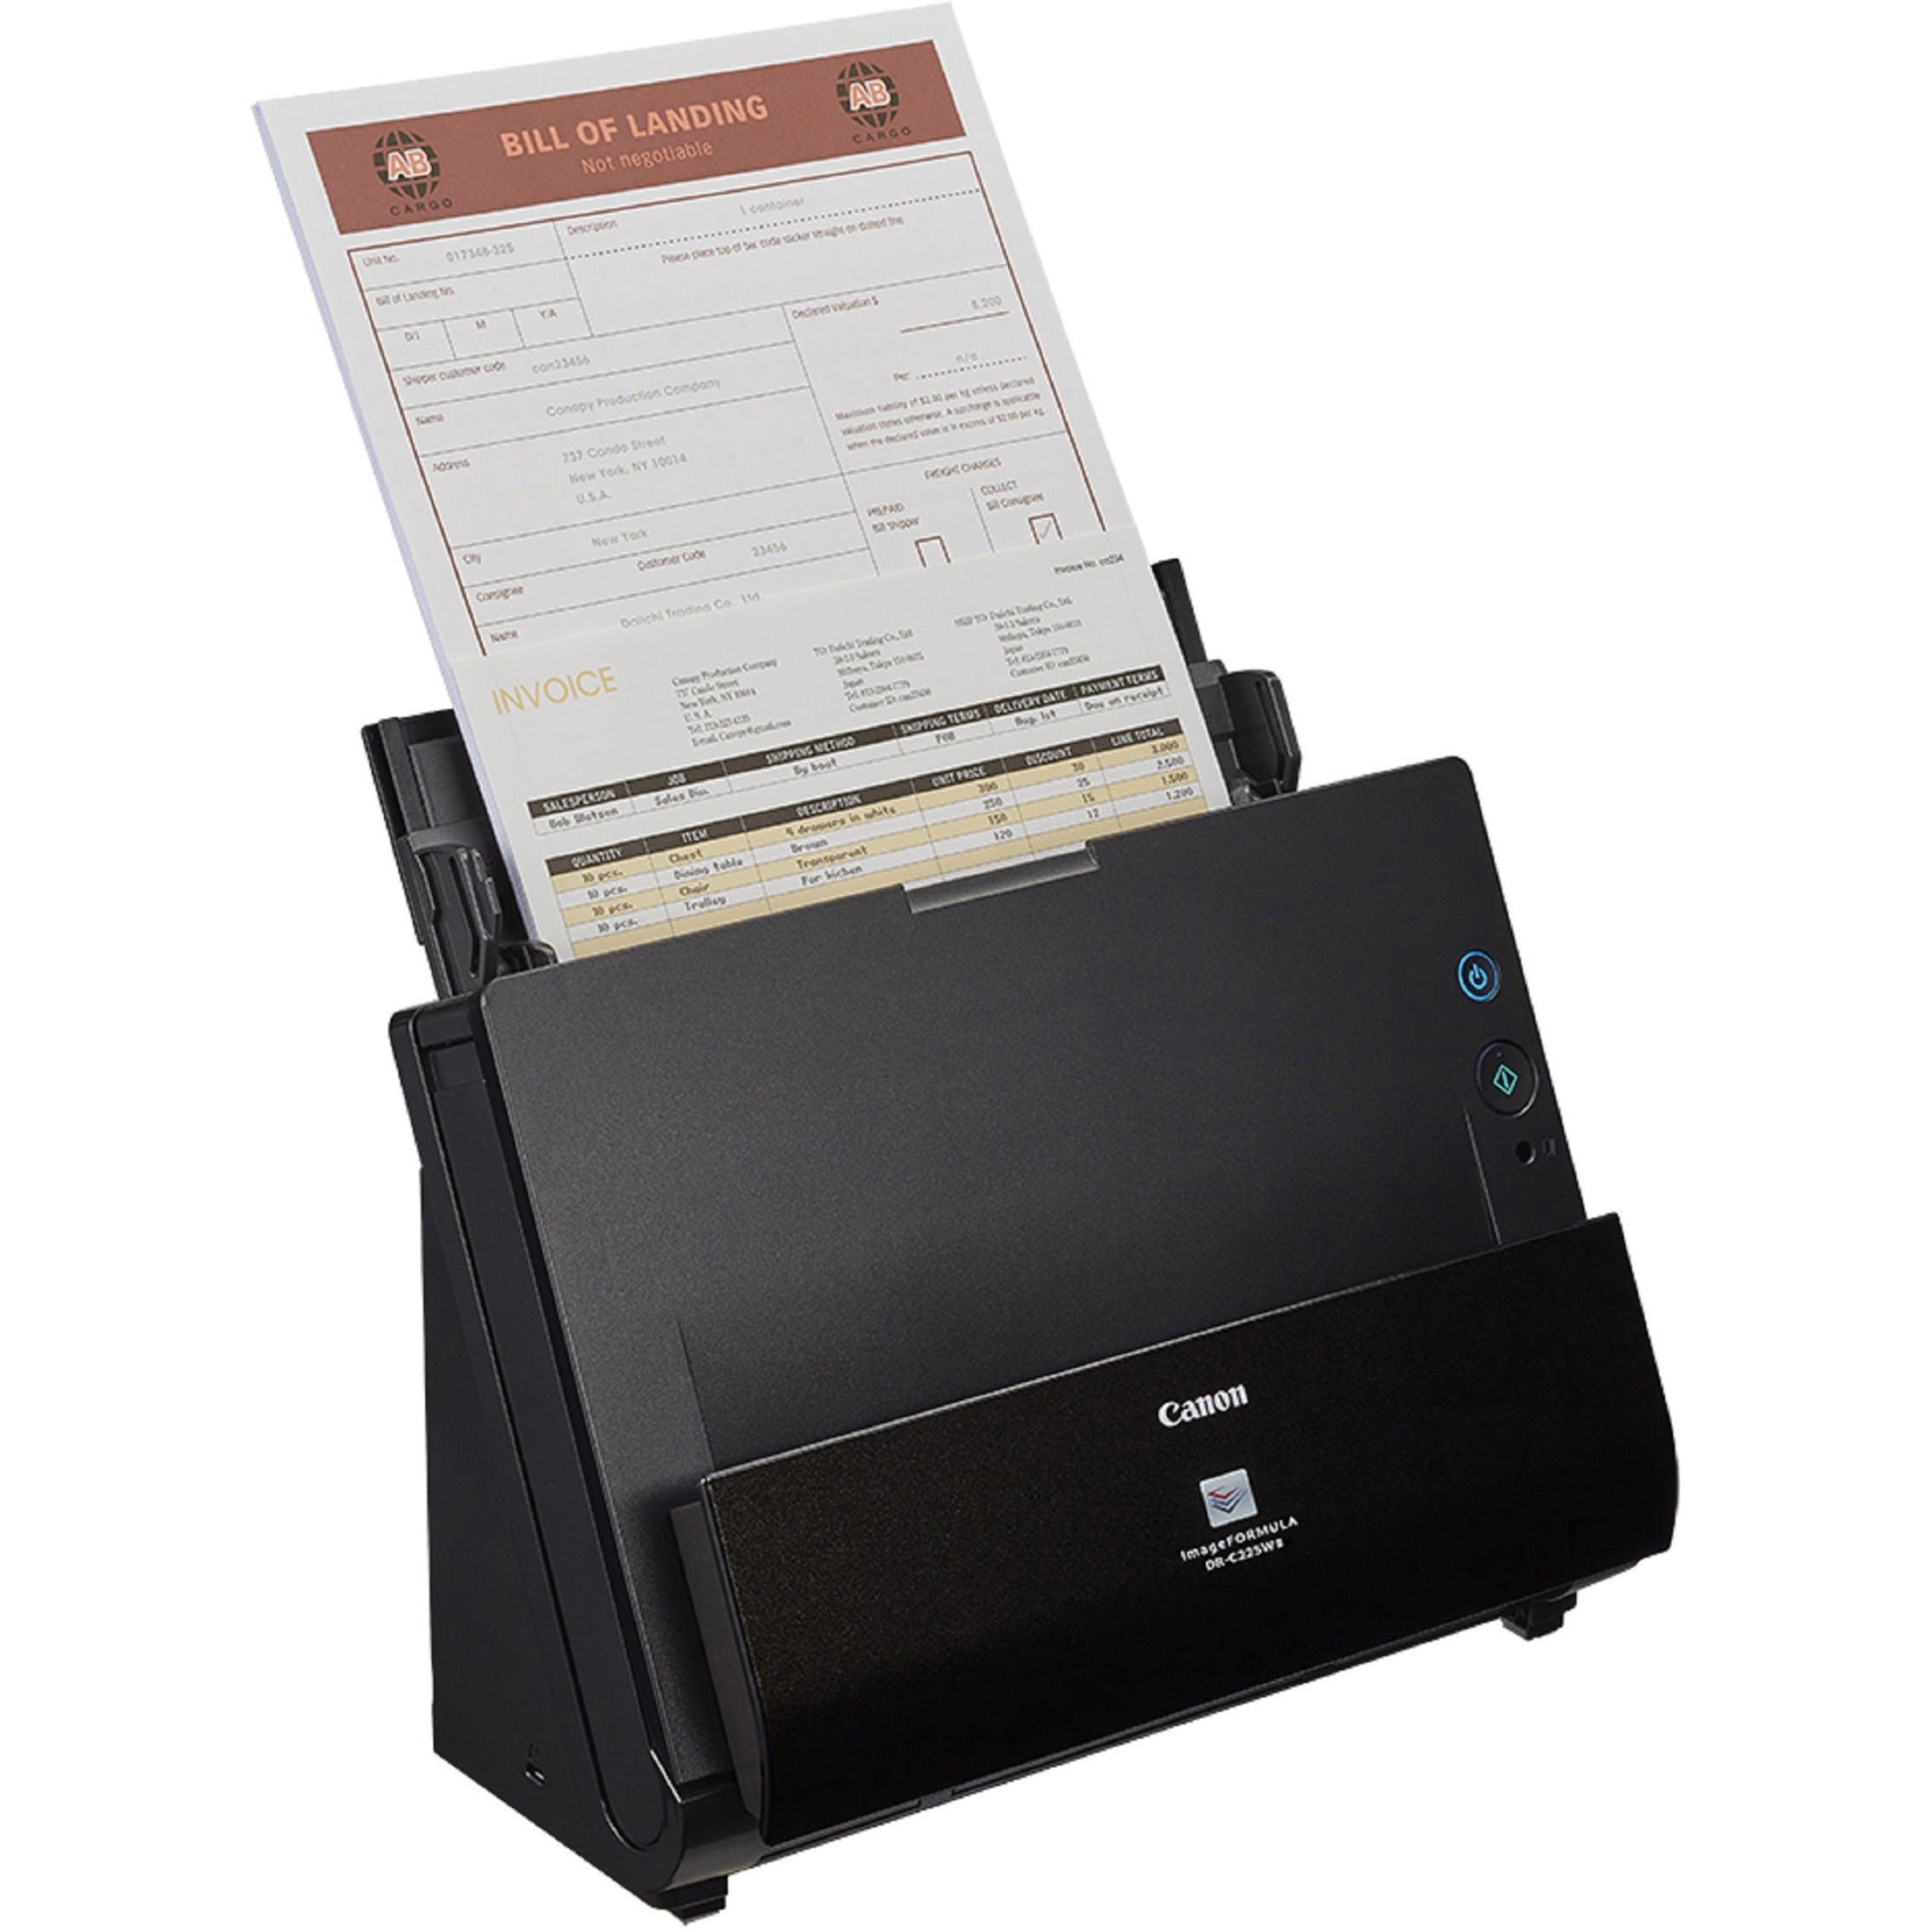 Canon 3259C002 imageFORMULA DR-C225W II Office Document Scanner, 25ppm, 11-4/5x6-1/10x8-7/10, Black [Discontinued]